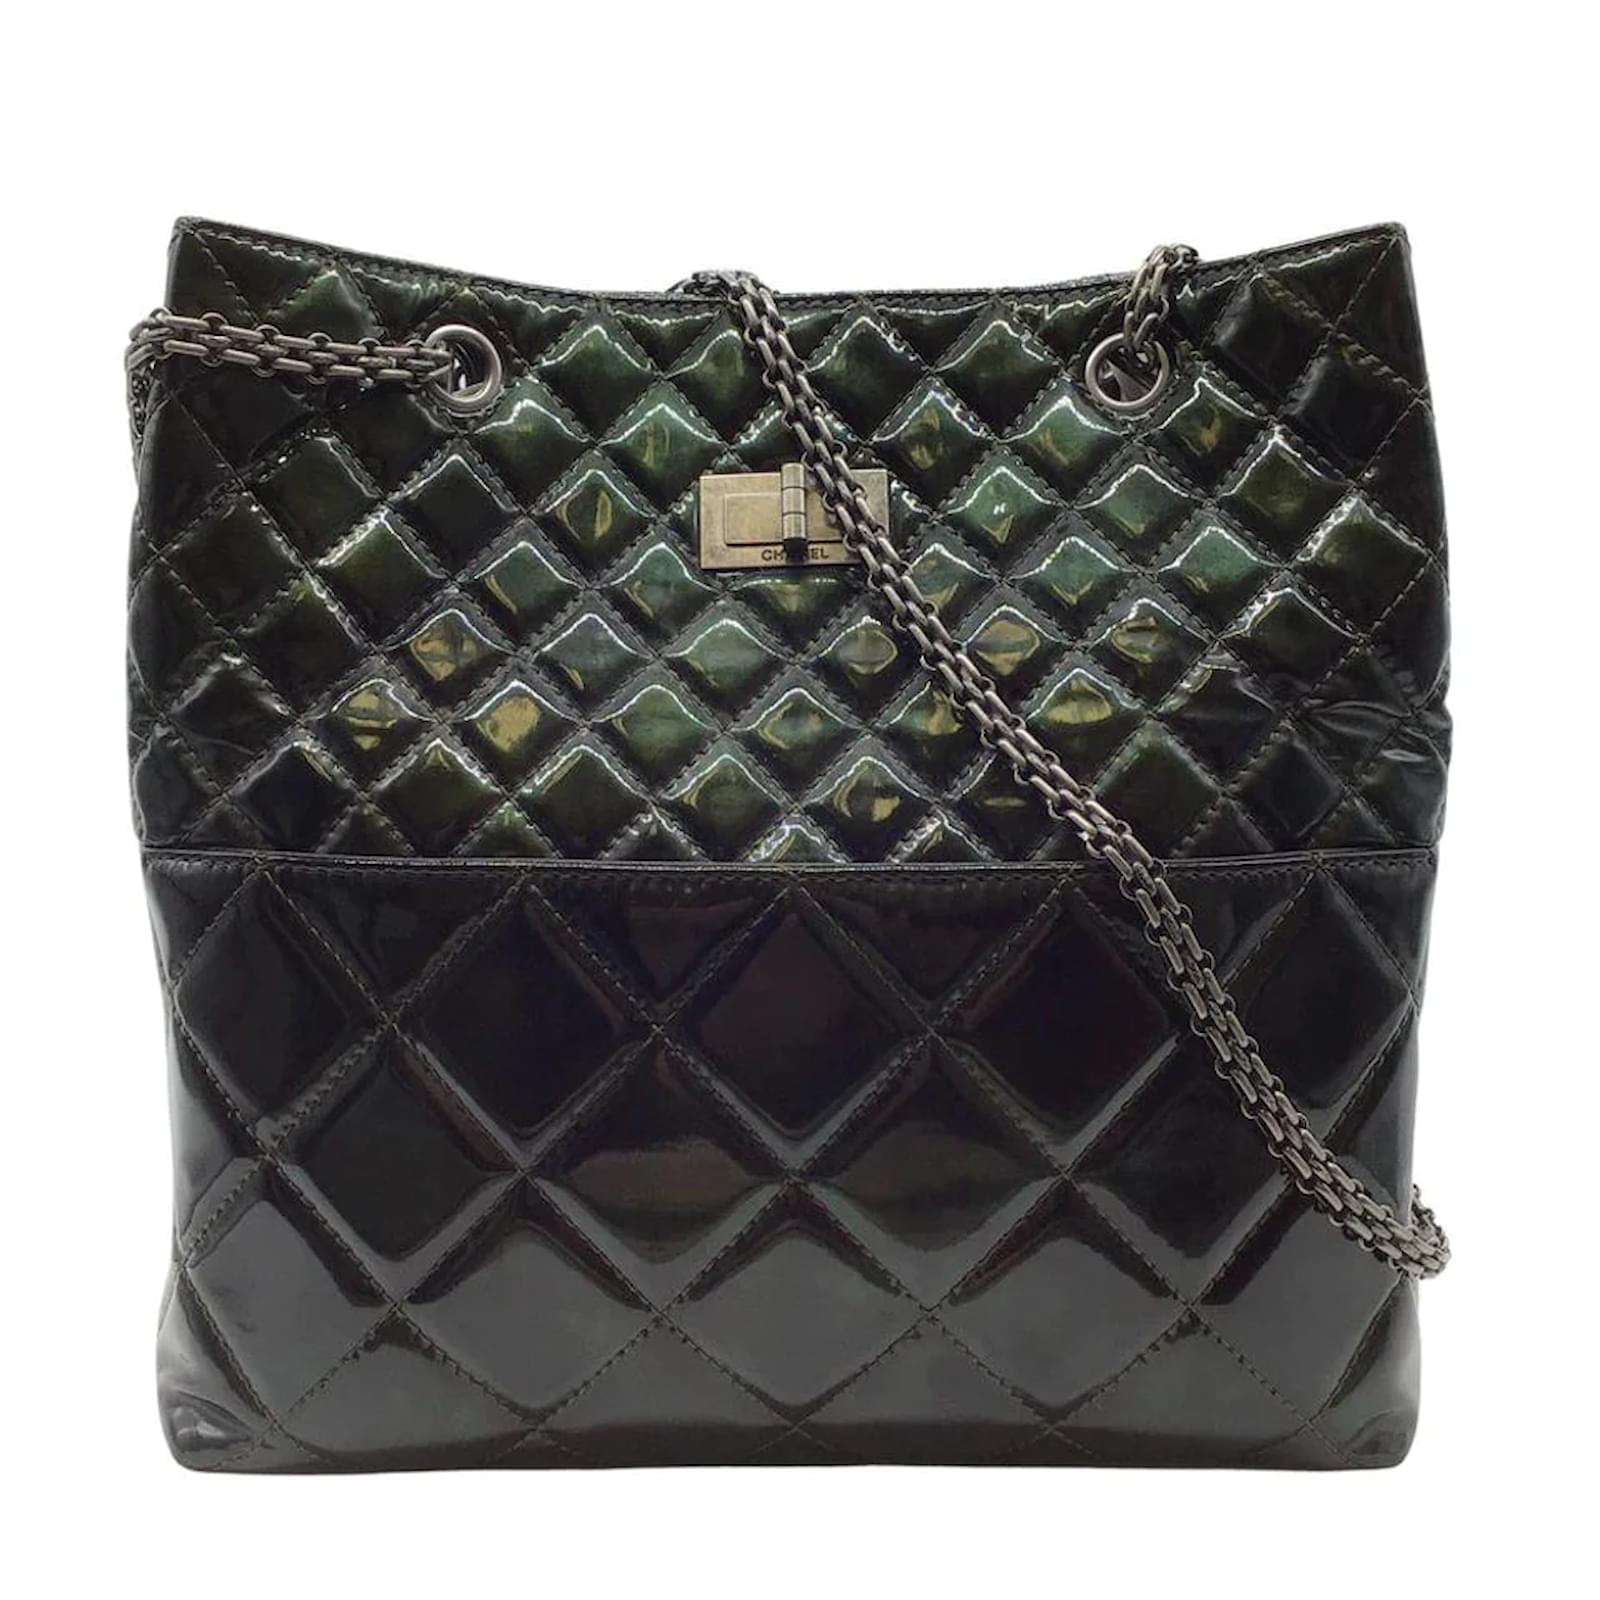 Handbags Chanel Chanel 2.55 Reissue Metallic Aged Calf Quilted Green Calfskin Leather Tote